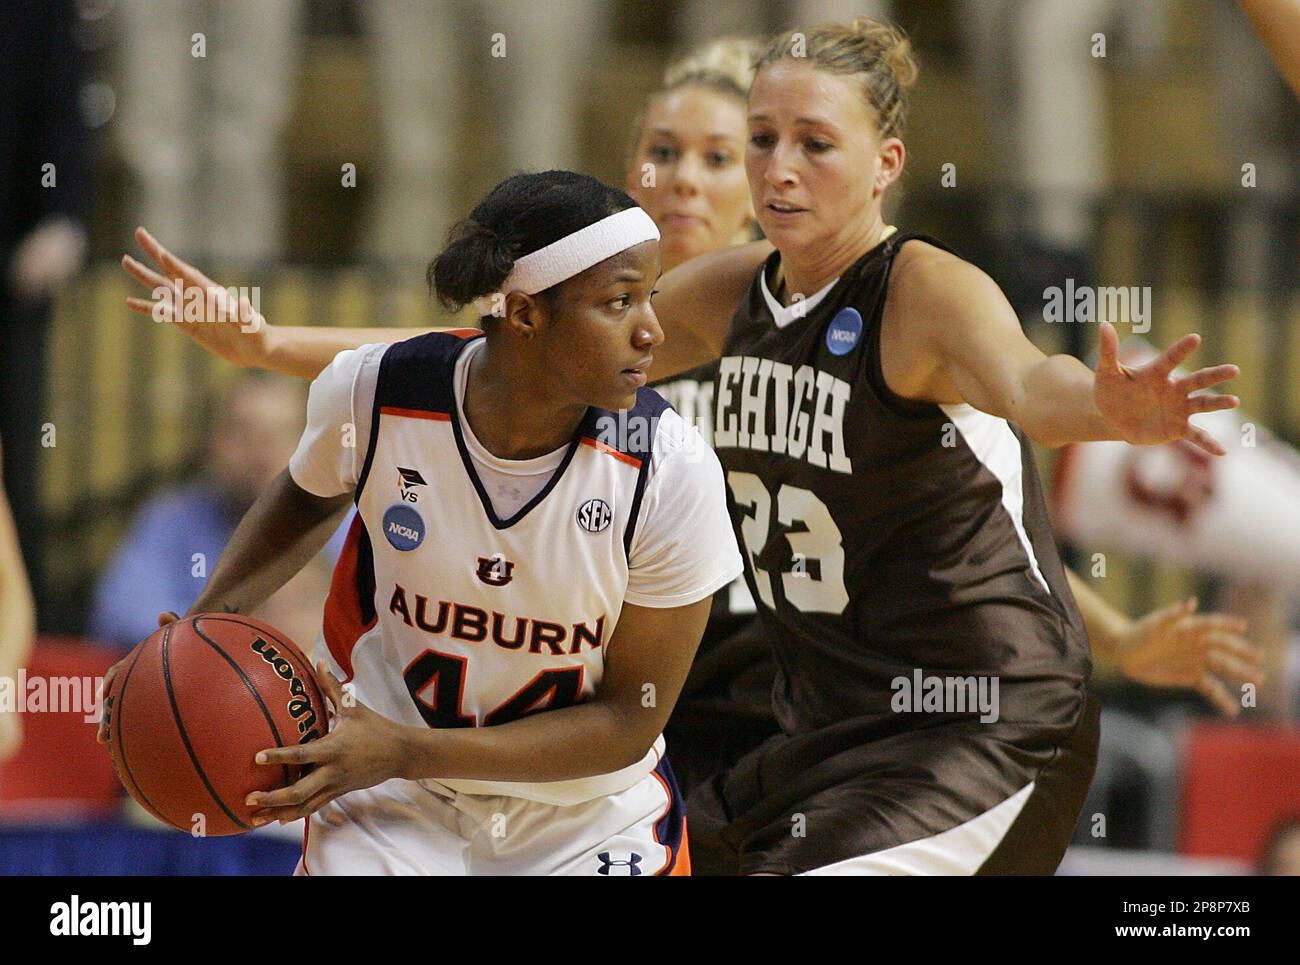 Lehigh's Haly Crites (23) covers Auburn's Whitney Boddie (44) during ...